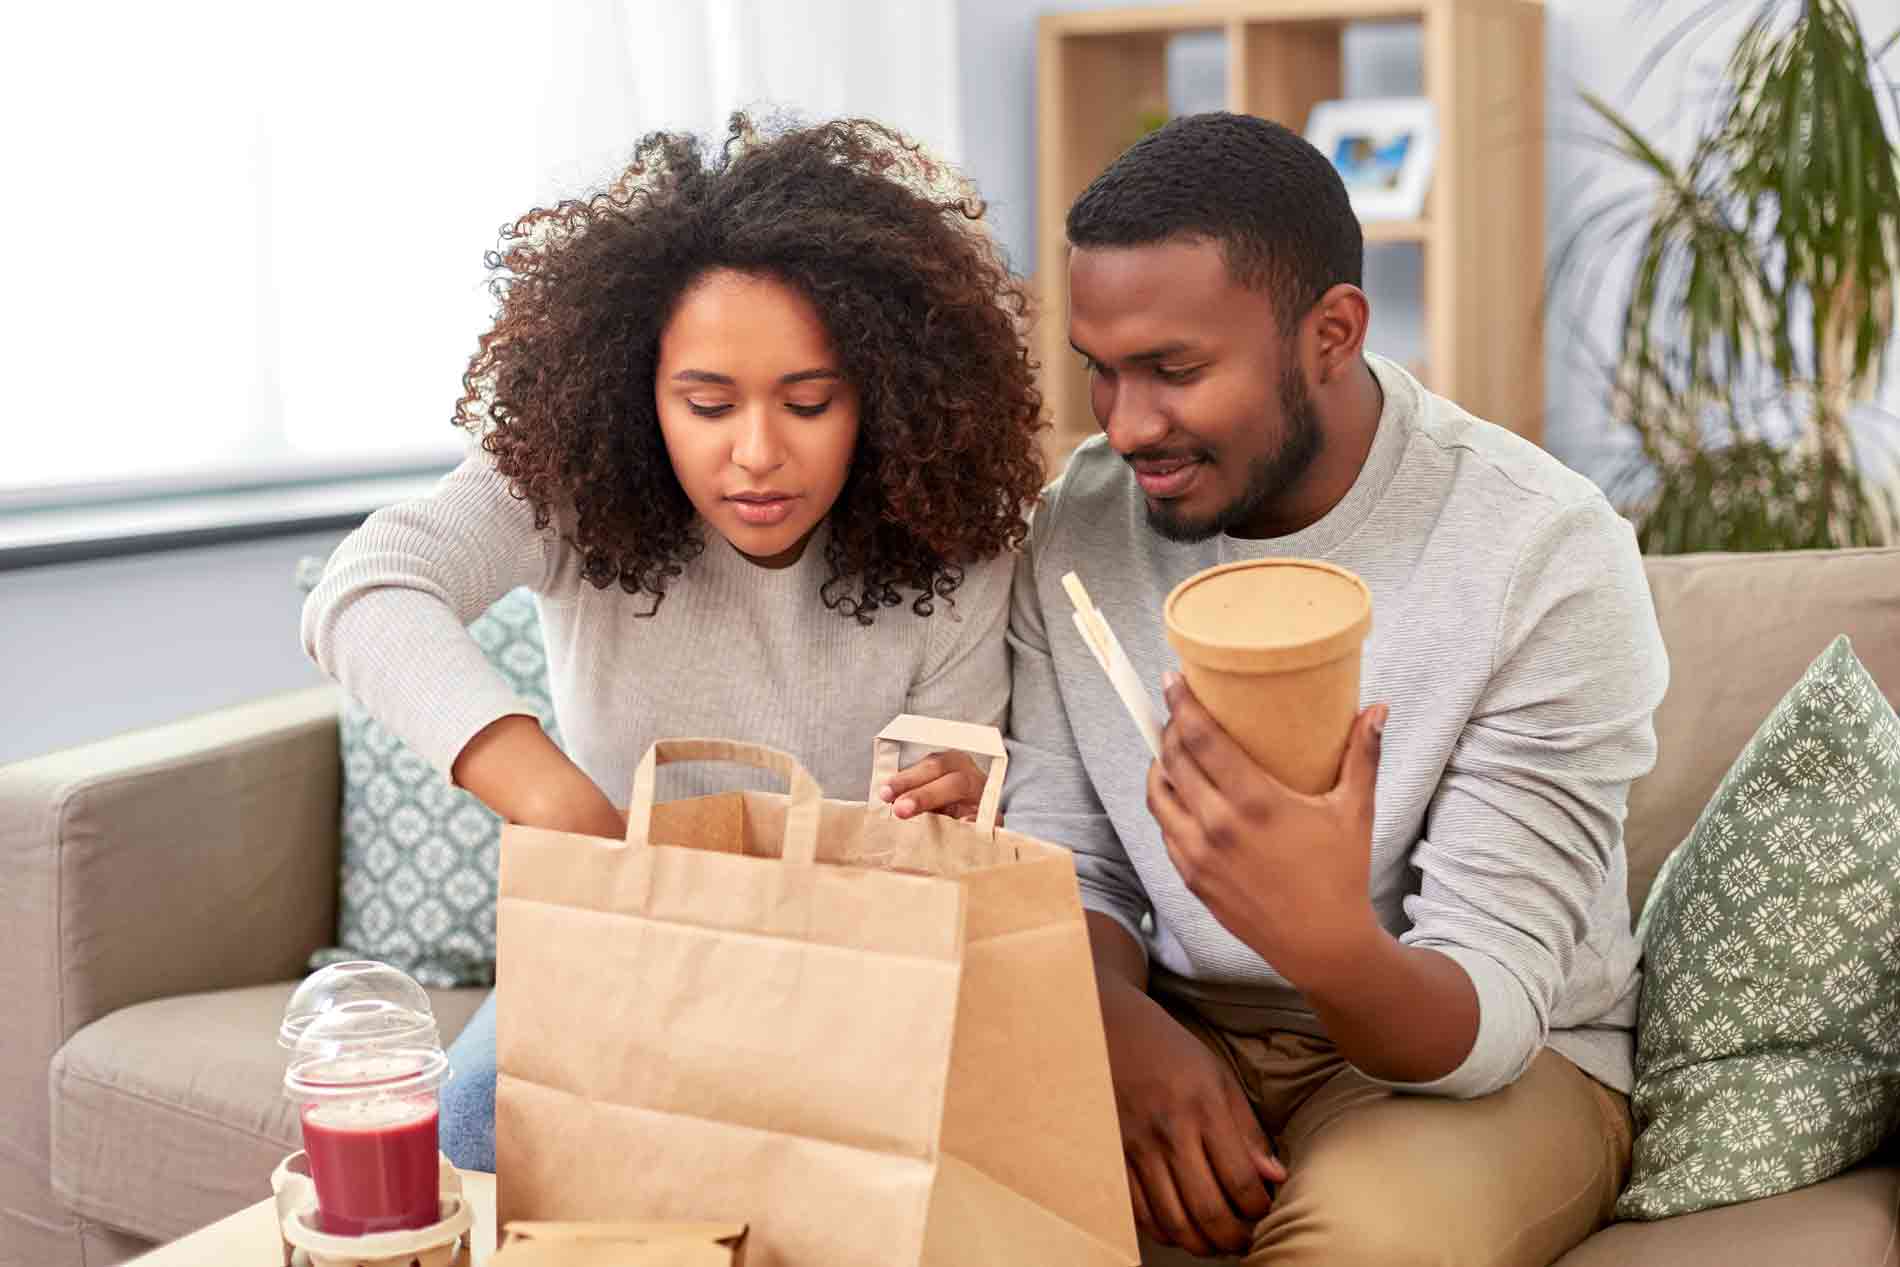 A man and woman take their delivery food out of the paper bag at home.